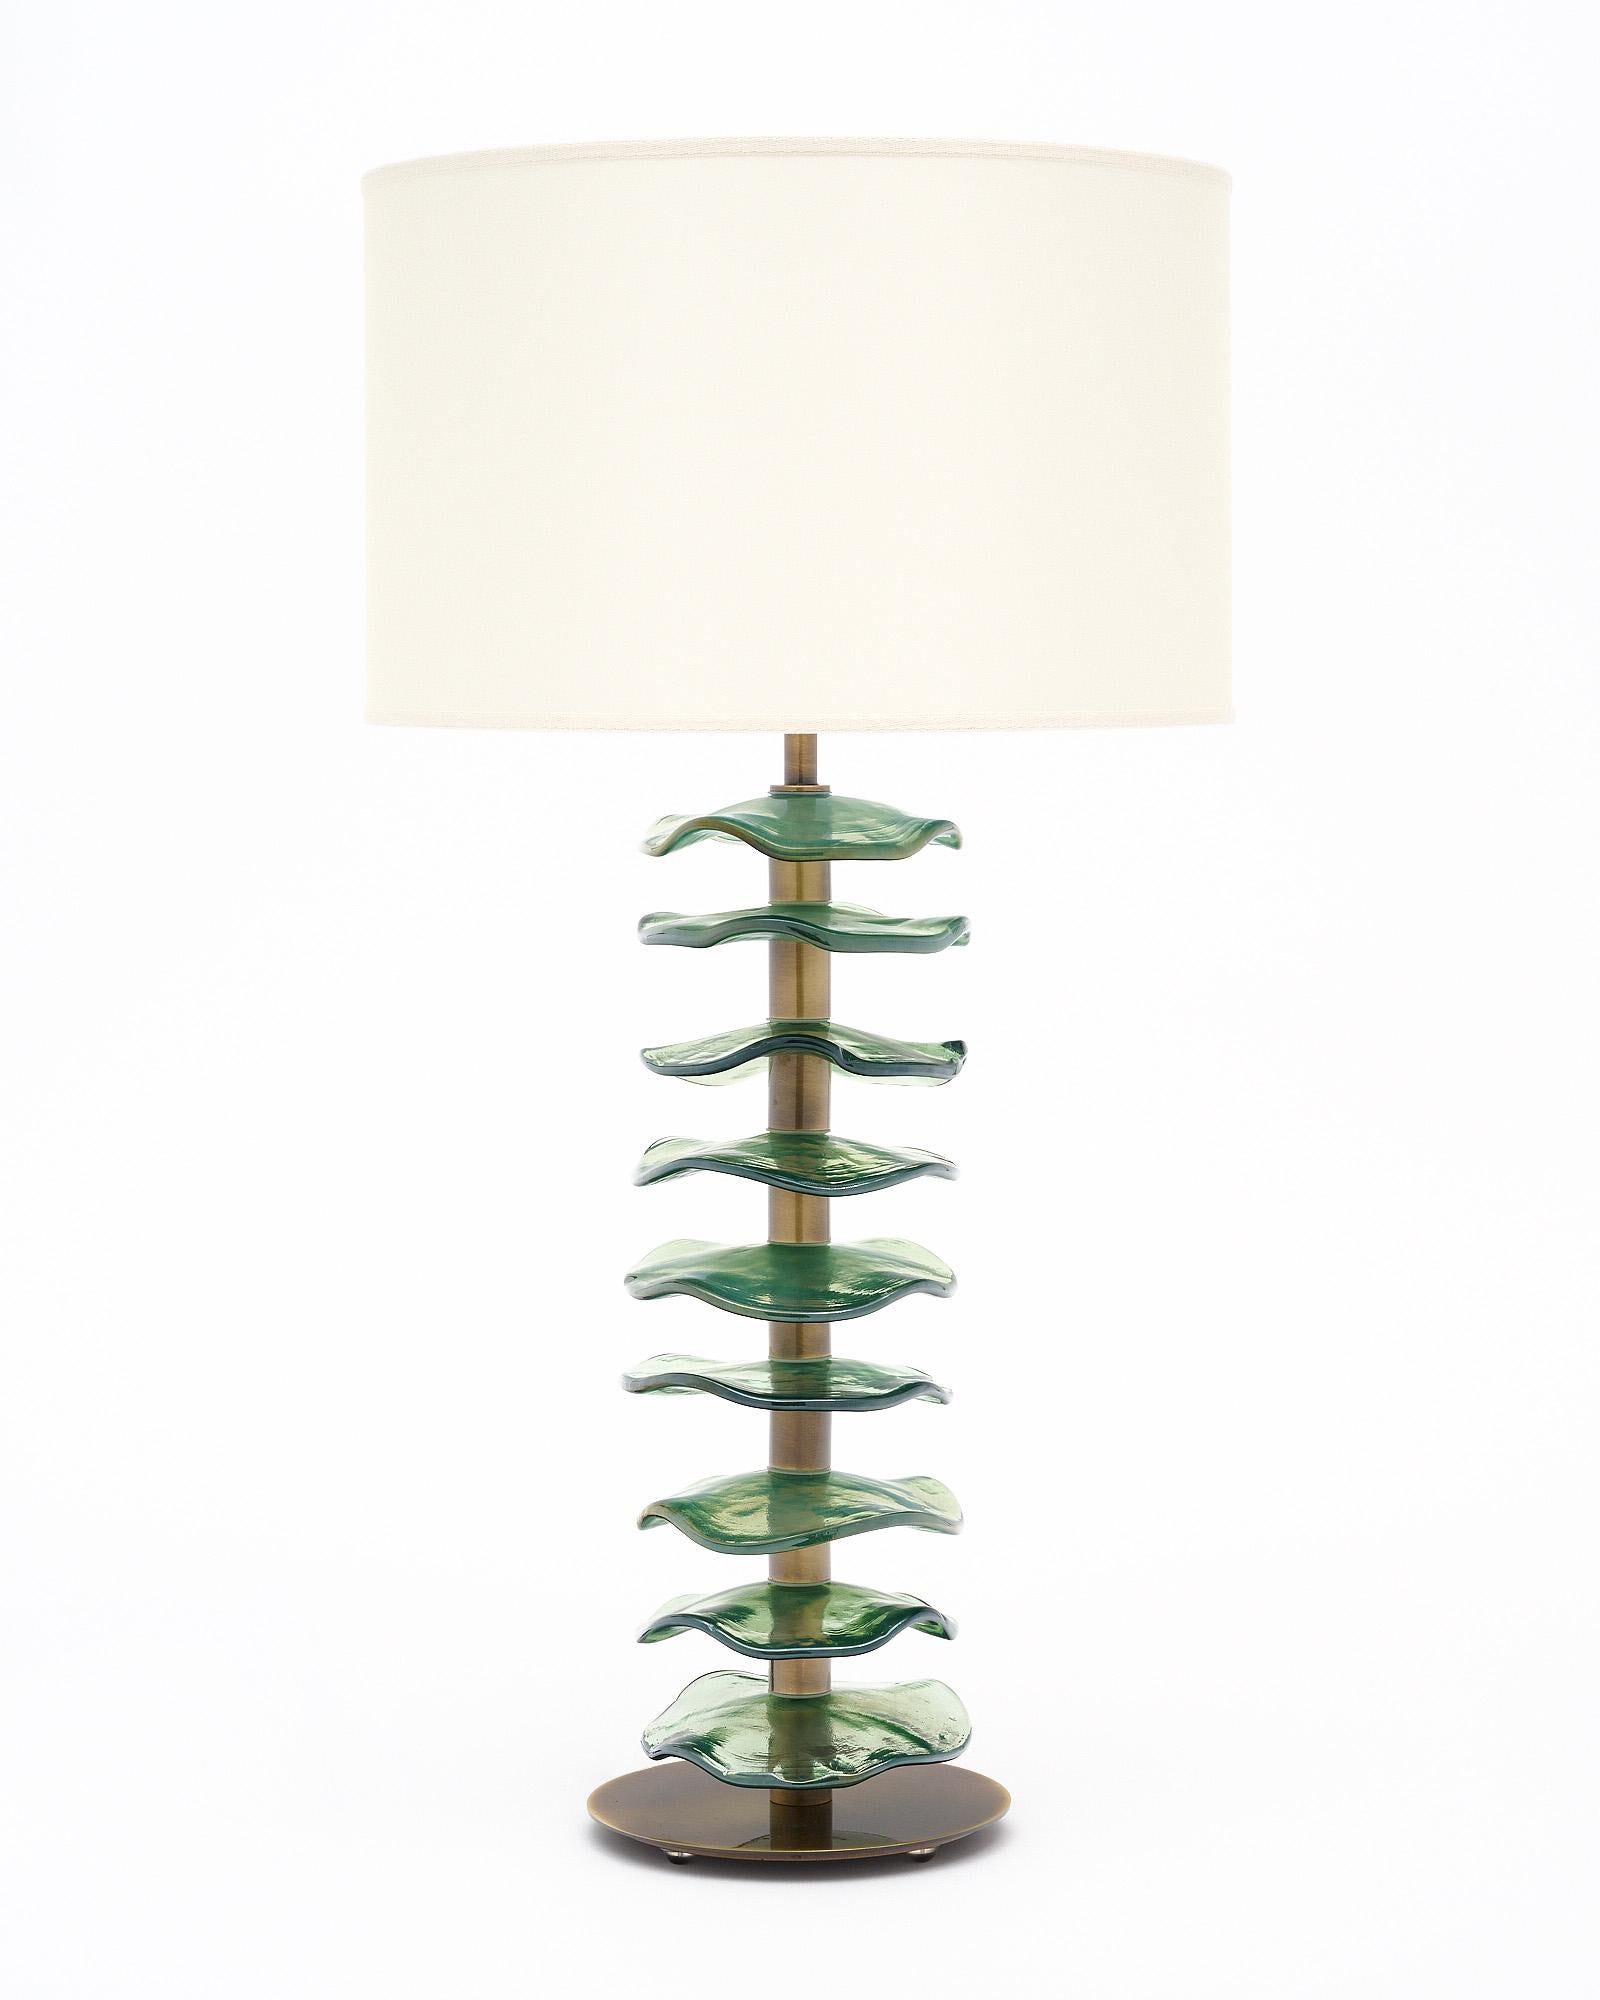 Pair of Italian lamps made of Murano glass. This pair features iridescent green glass discs separated by a brass structure. They are hand-crafted and have been newly wired to fit US standards.